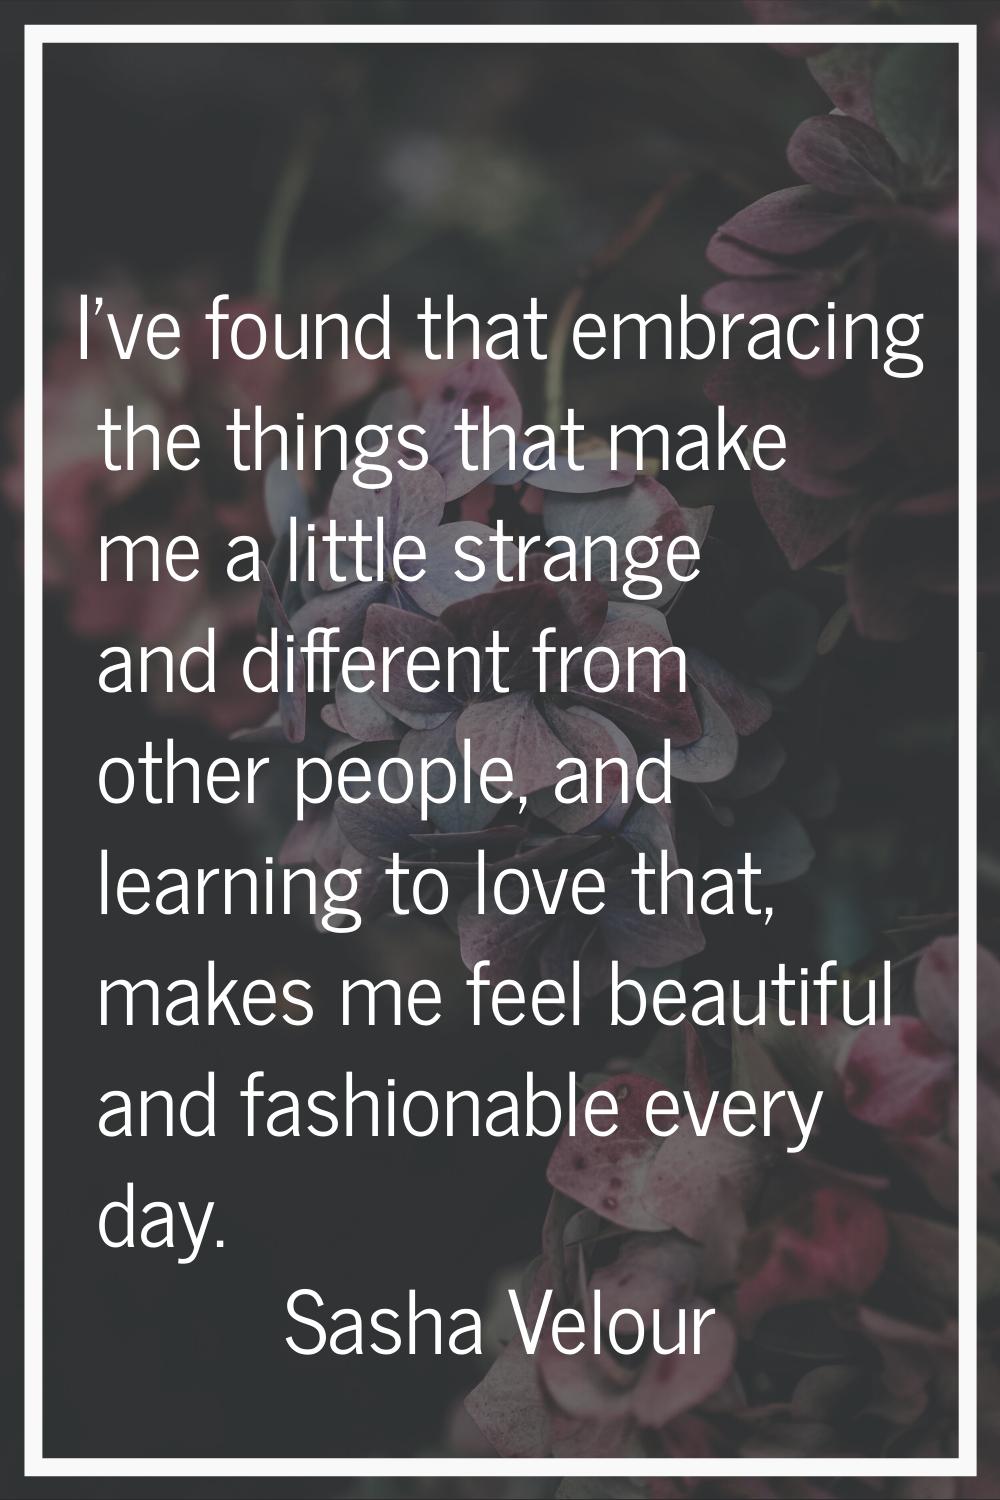 I've found that embracing the things that make me a little strange and different from other people,